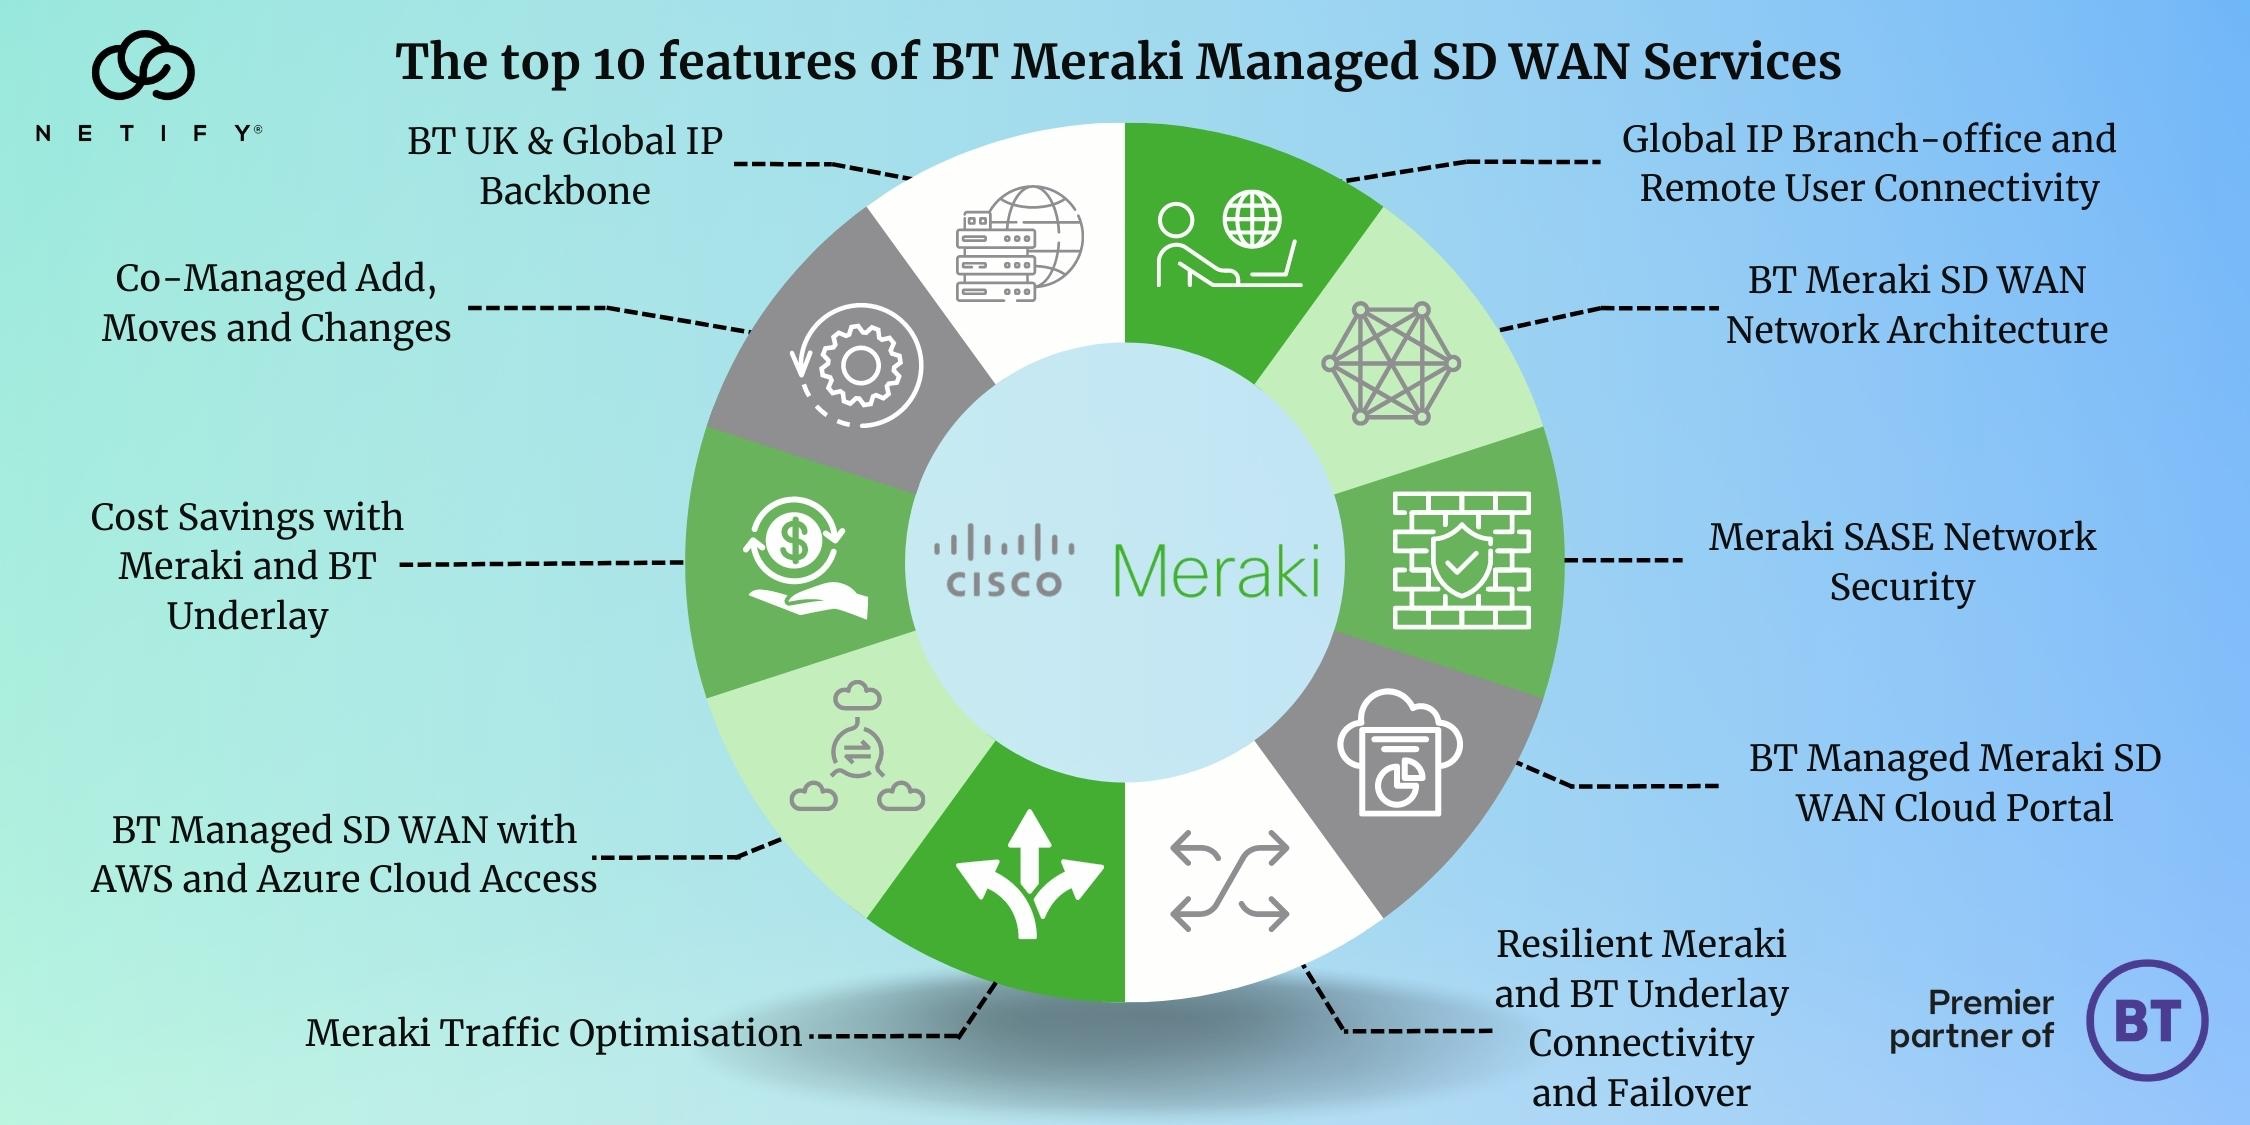 The top 10 features of BT Meraki Managed SD WAN Services